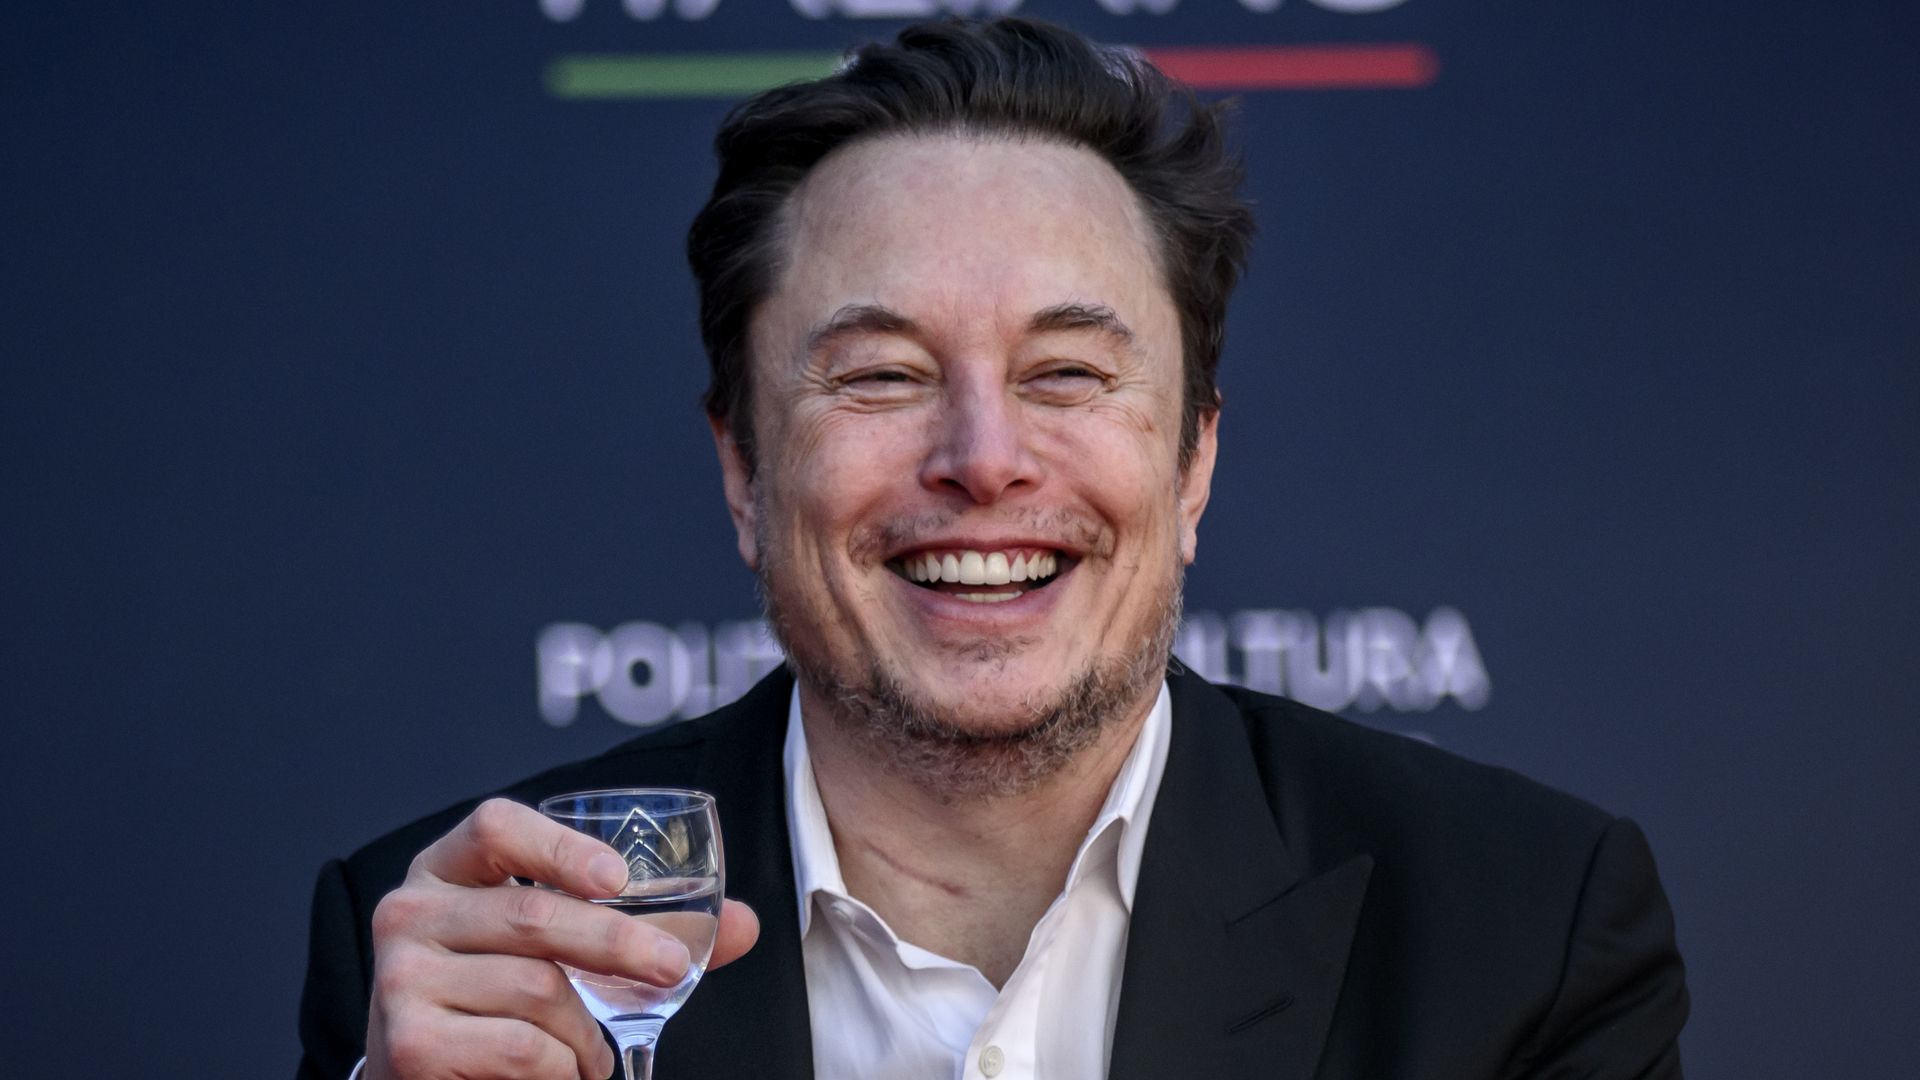 Elon Musk holding a glass and smiling.